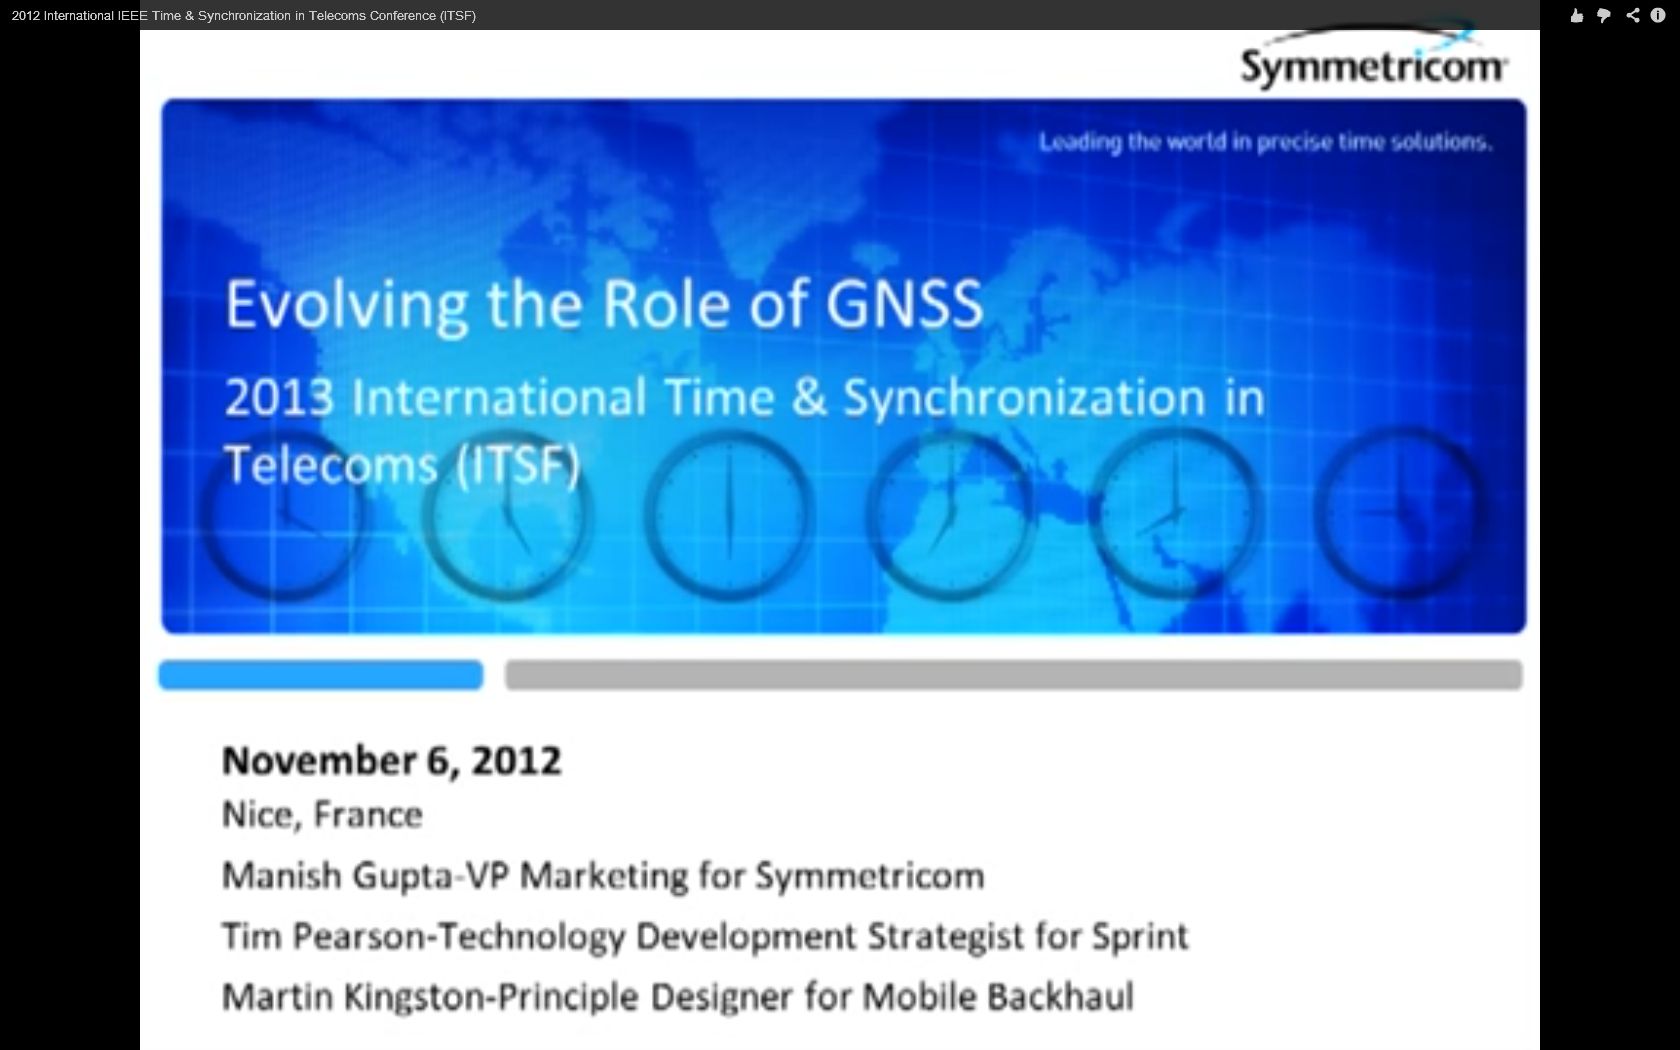 2012 International IEEE Time & Synchronization in Telecoms Conference 